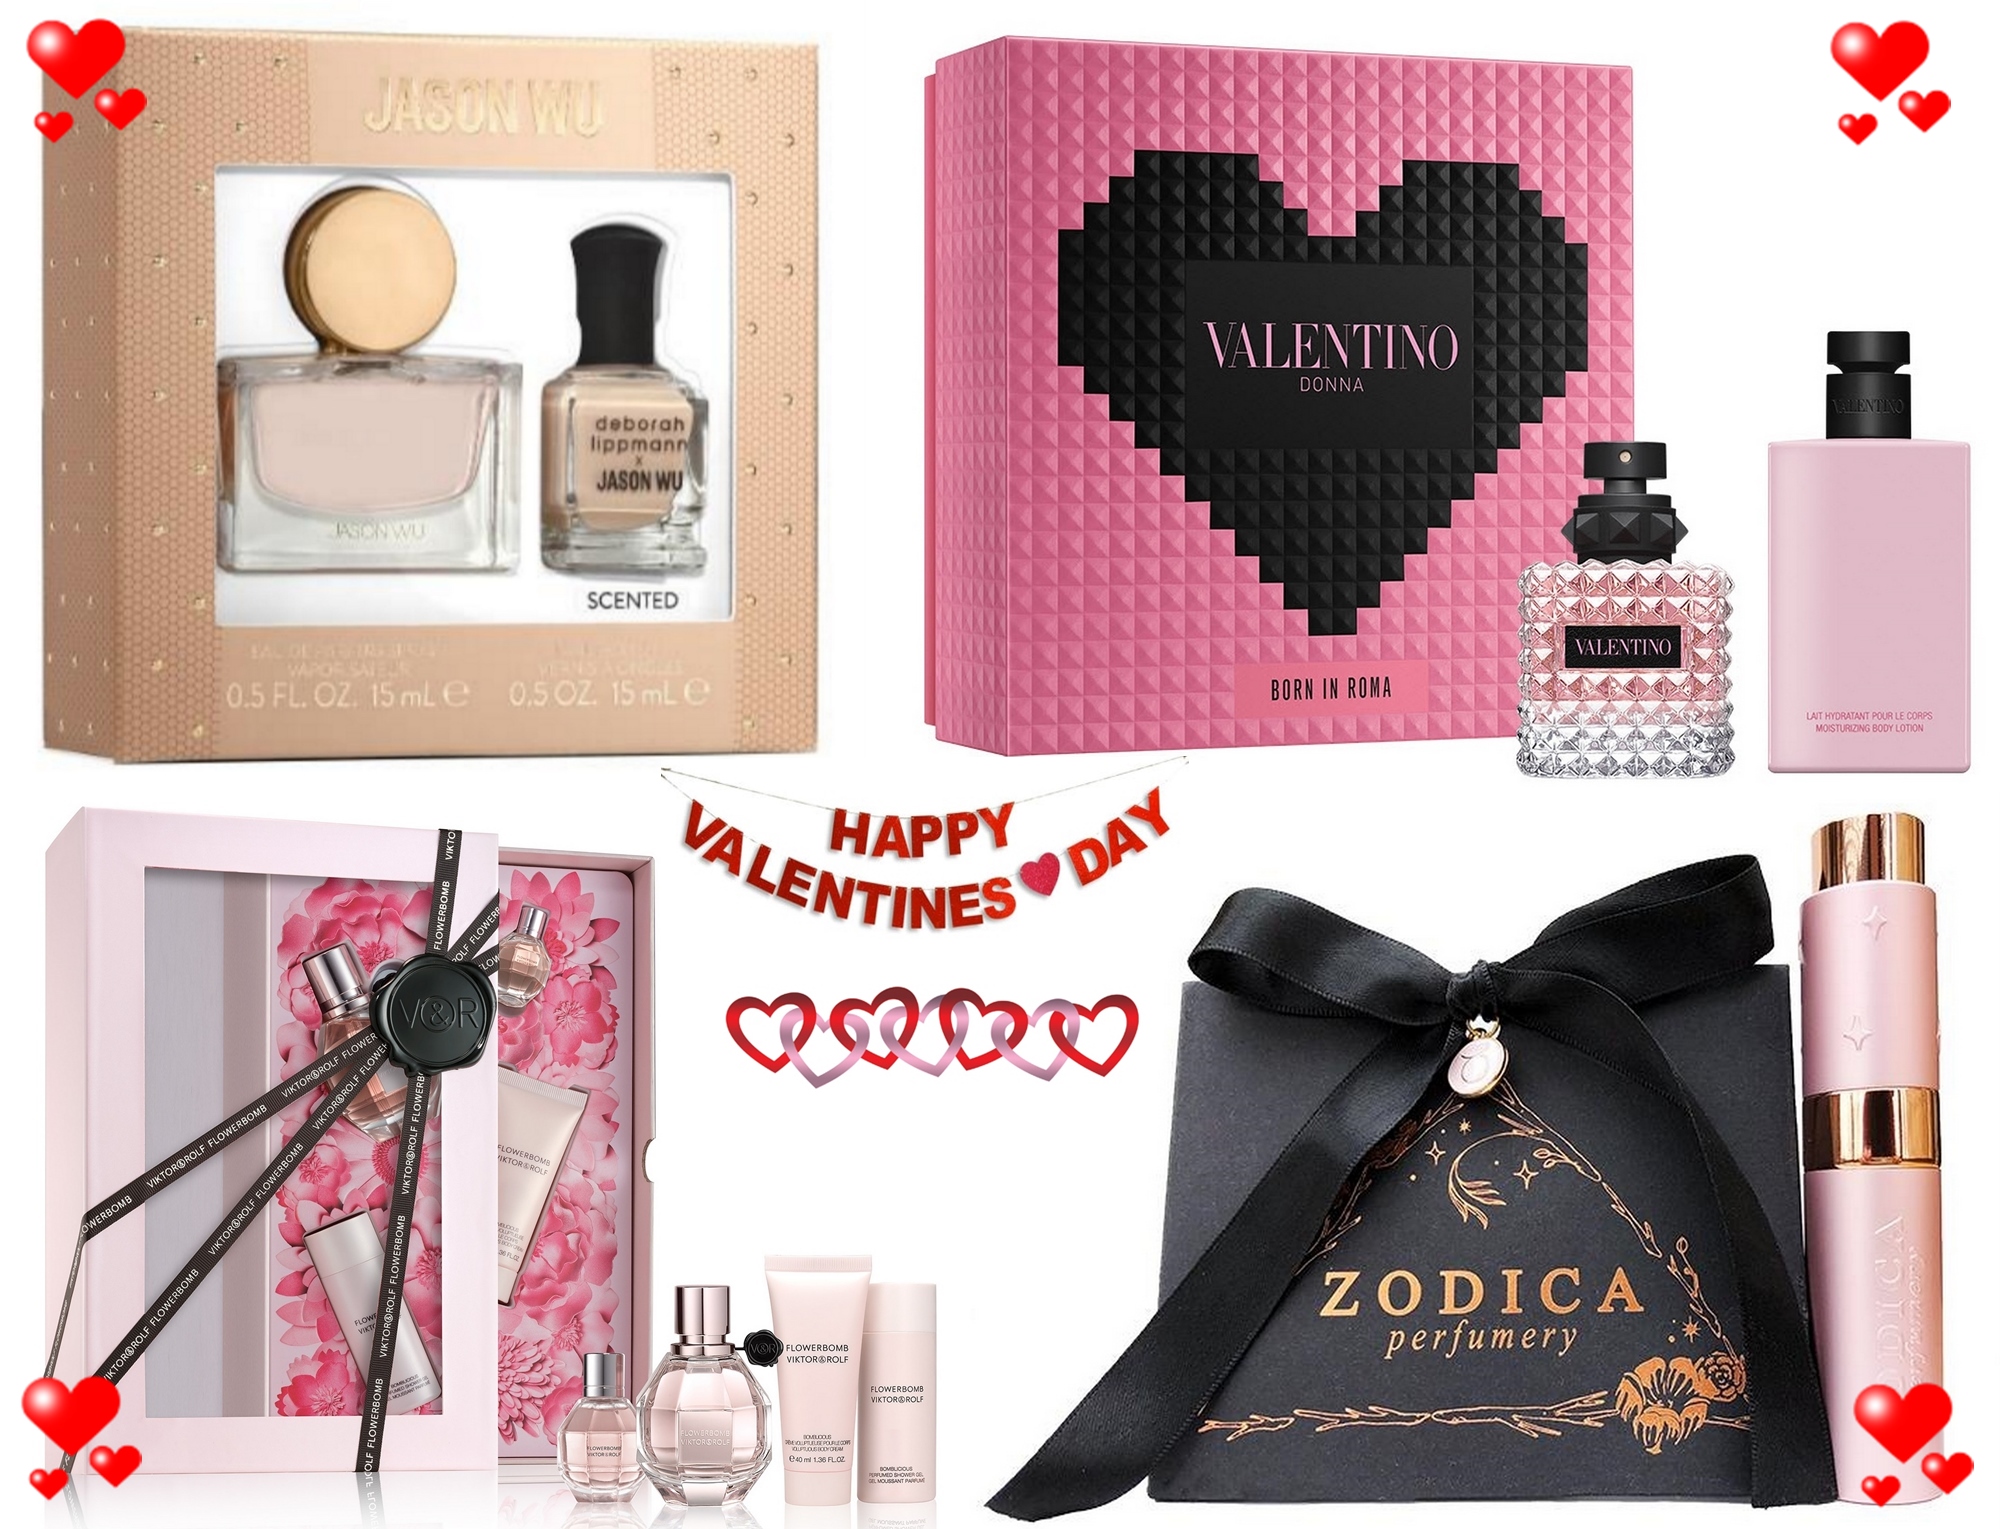 Valentine's Day Gifts: All Sets for Gifts This Valentine’s Day